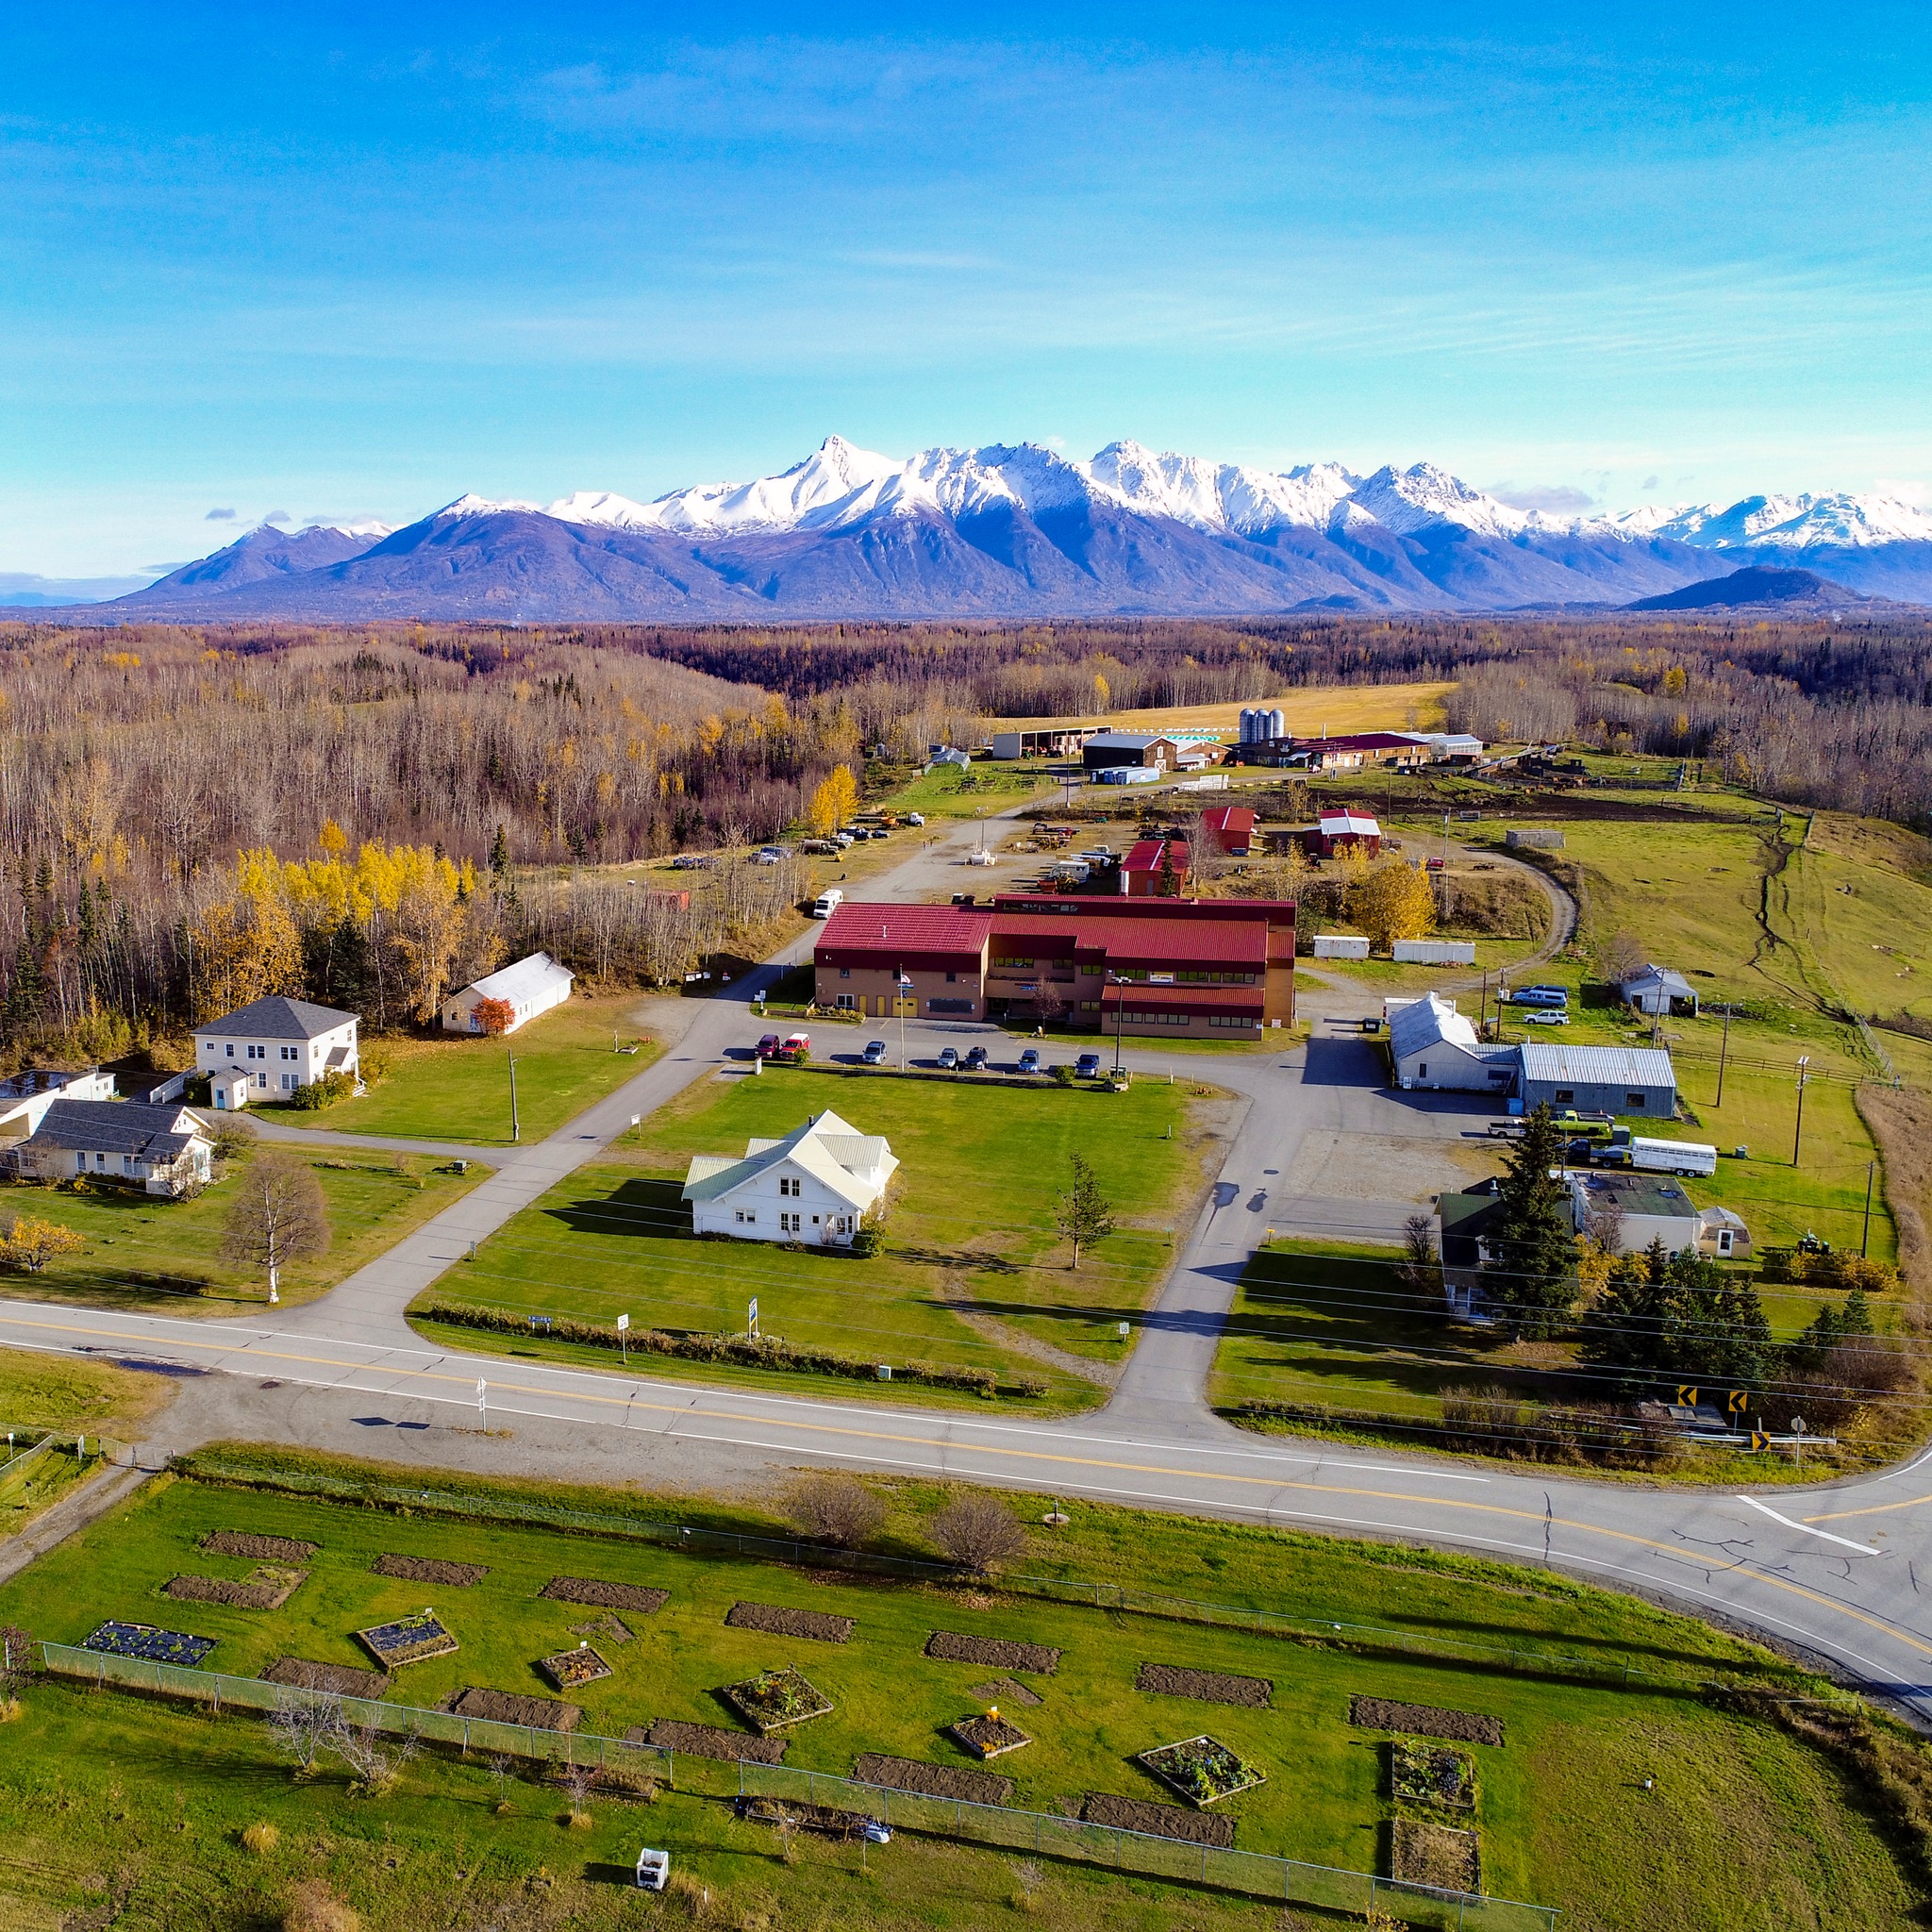 Gardens, barns and other farm buildings with snow-capped mountains in the background